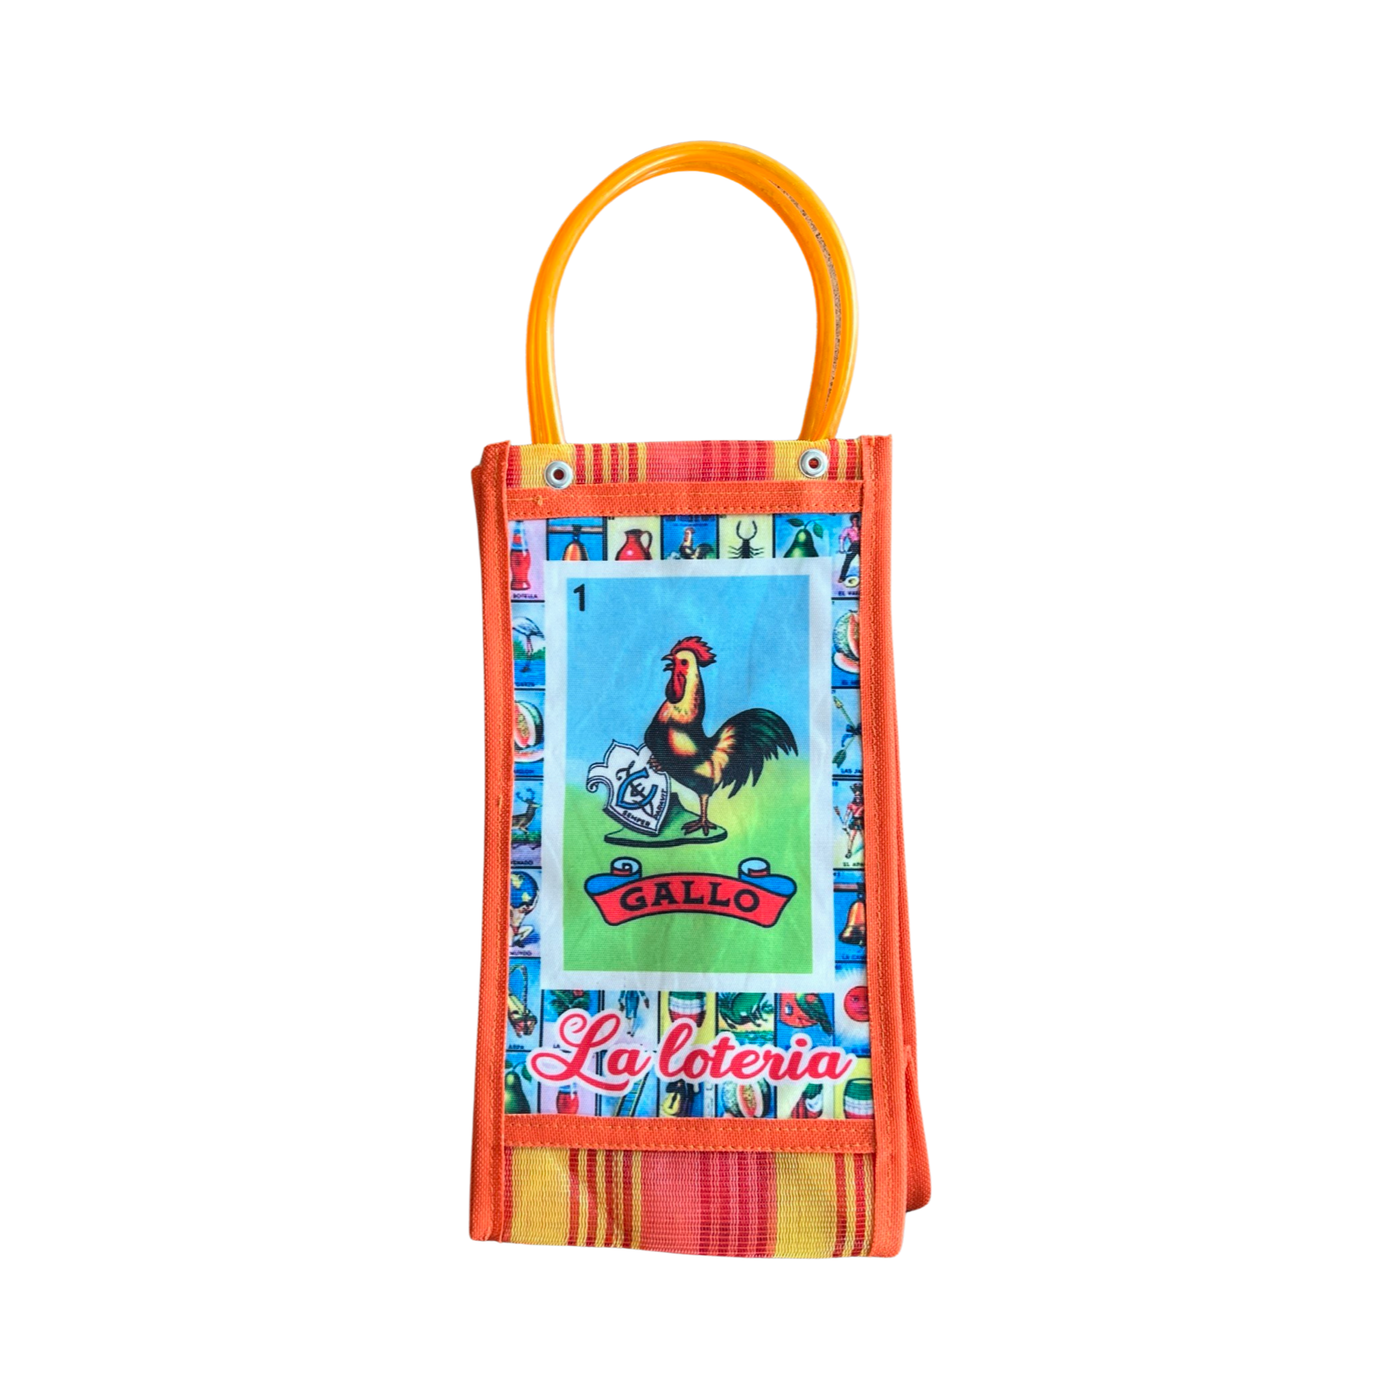 Orange Mexican mesh market bag with an image of the Gallo loteria card.